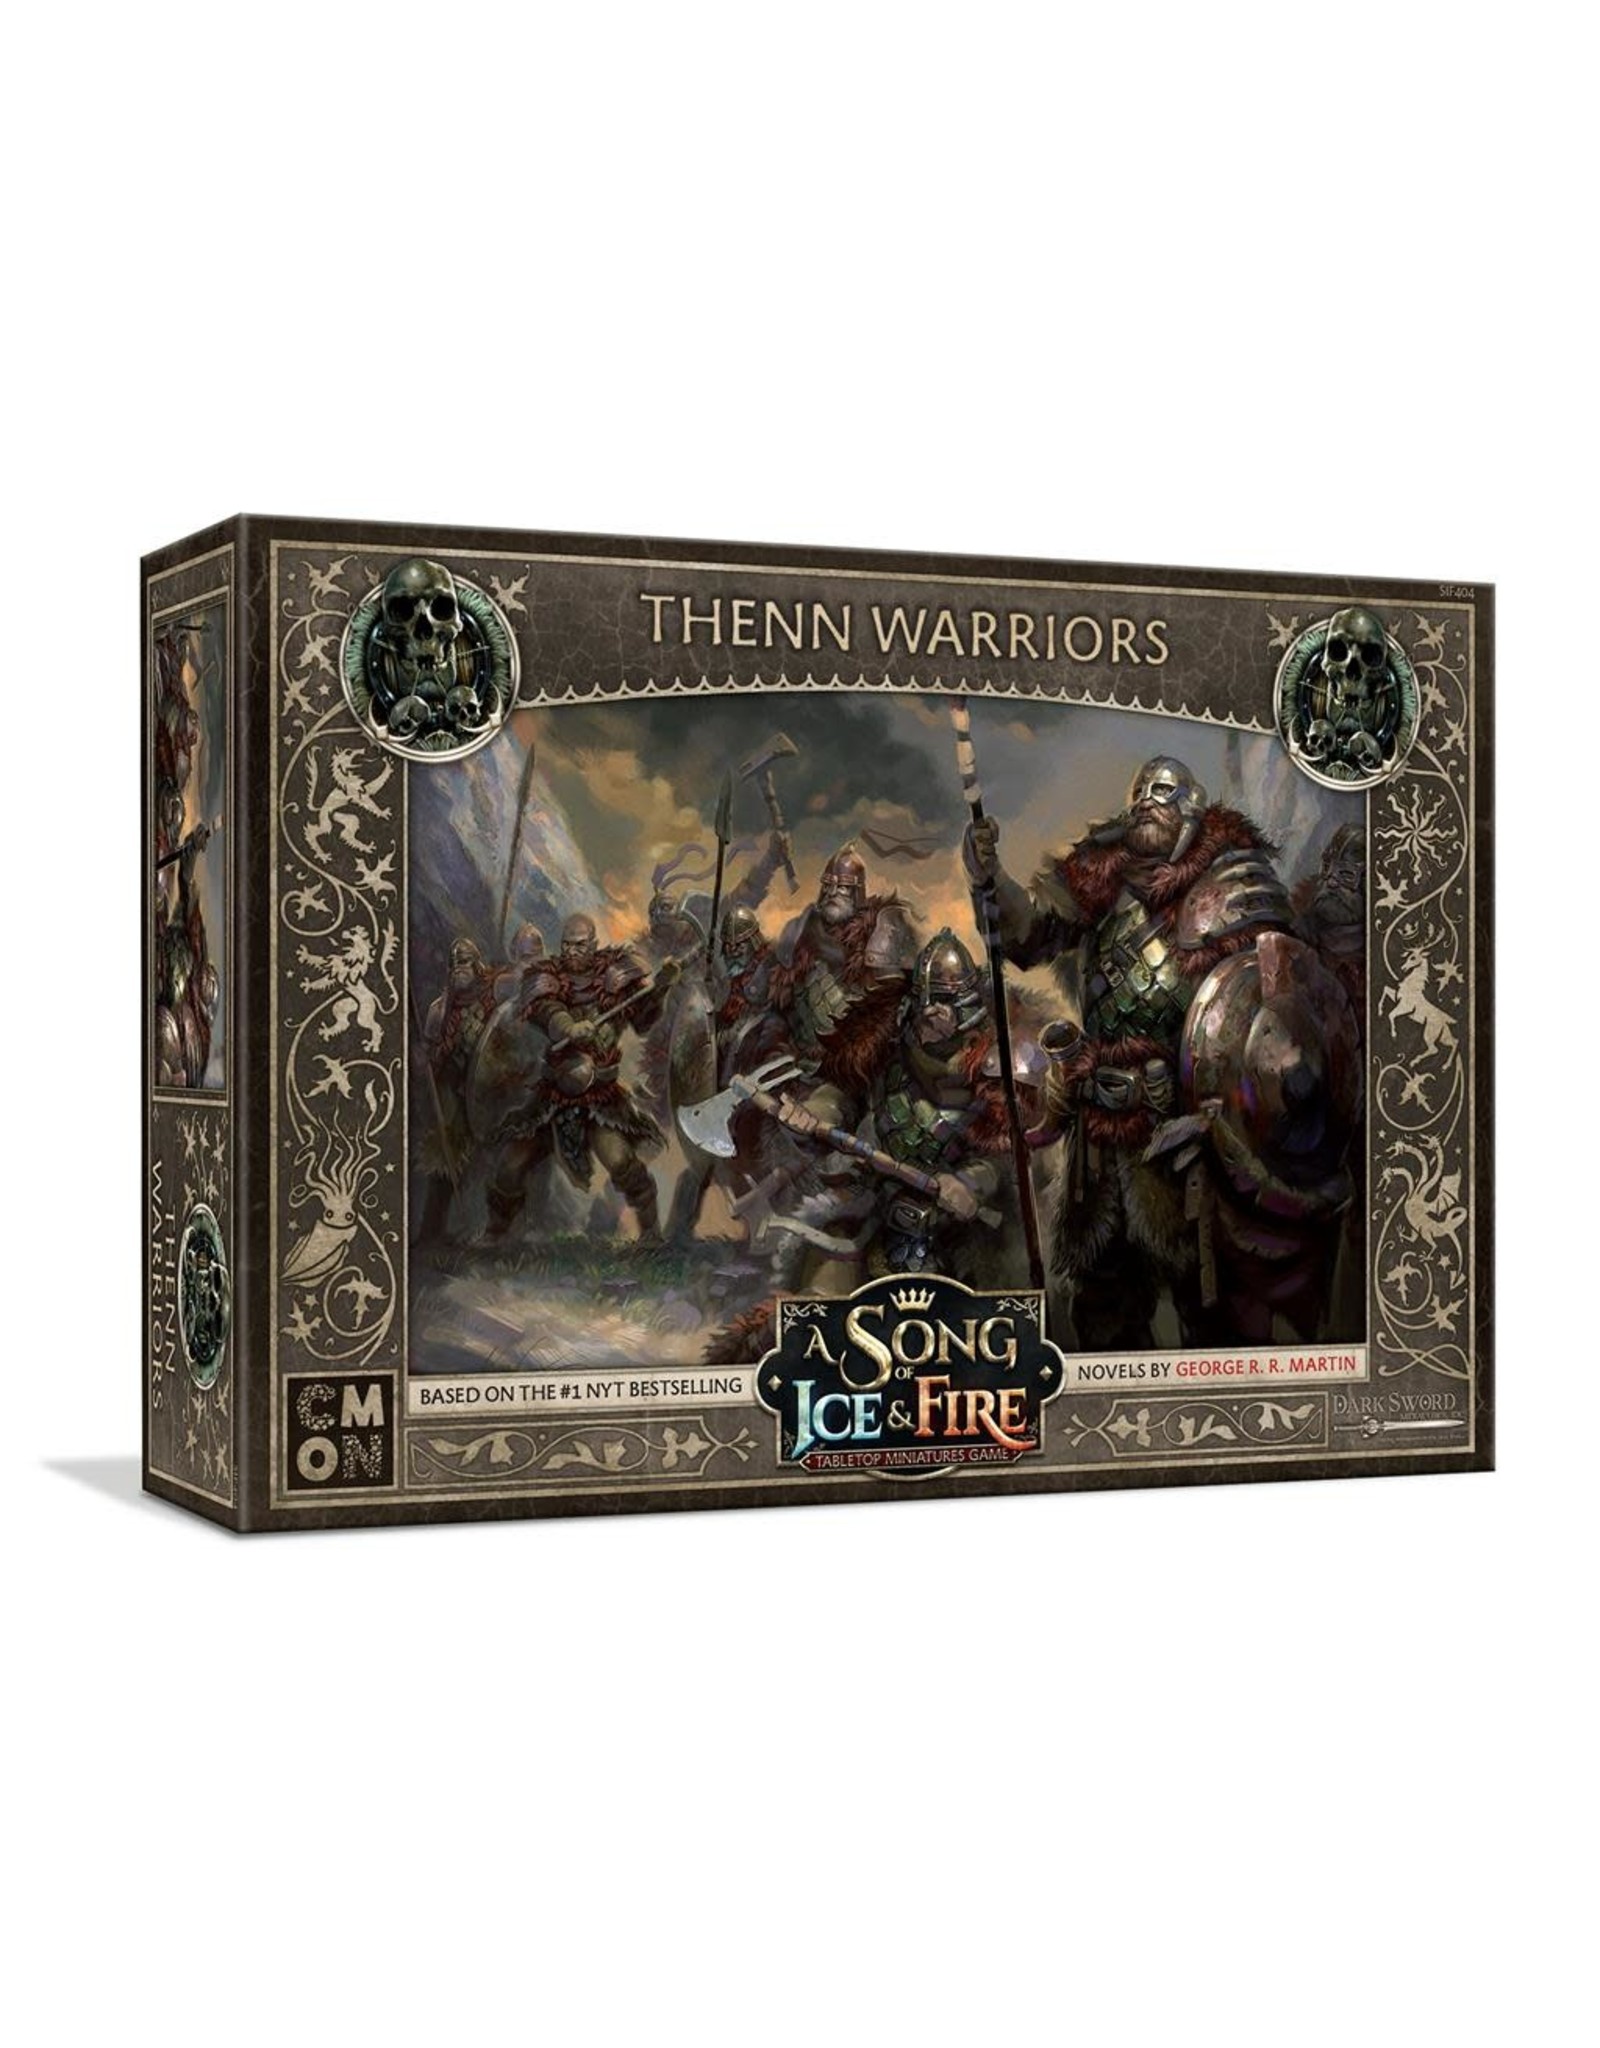 Cool Mini or Not A Song of Ice & Fire Tabletop Miniatures Game: Free Folk Thenn Warriors